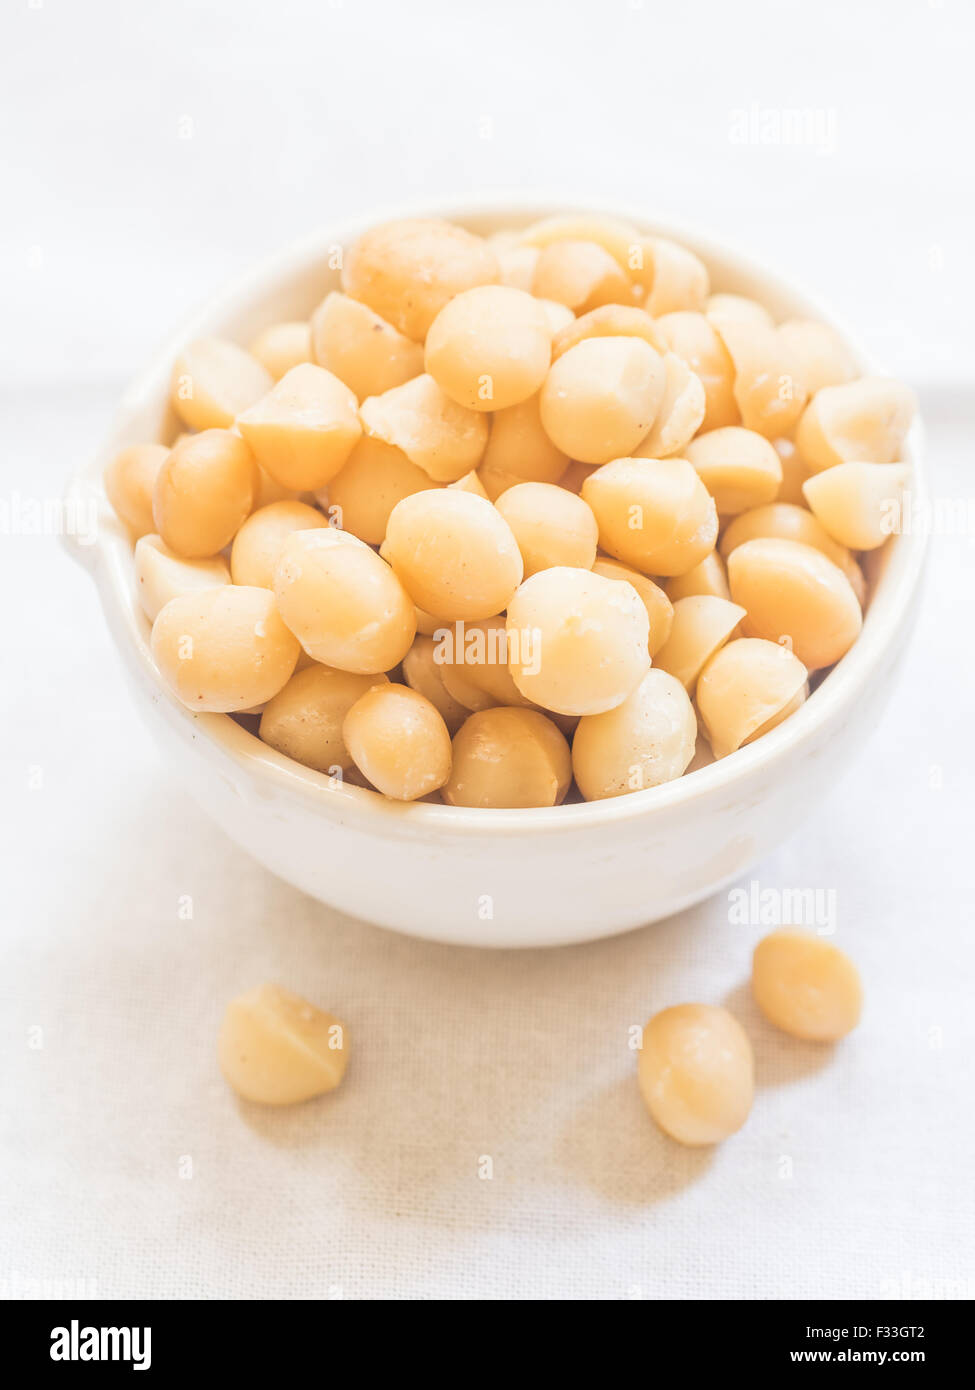 Macadamia nut in a white bowl, on a clear white background. Stock Photo